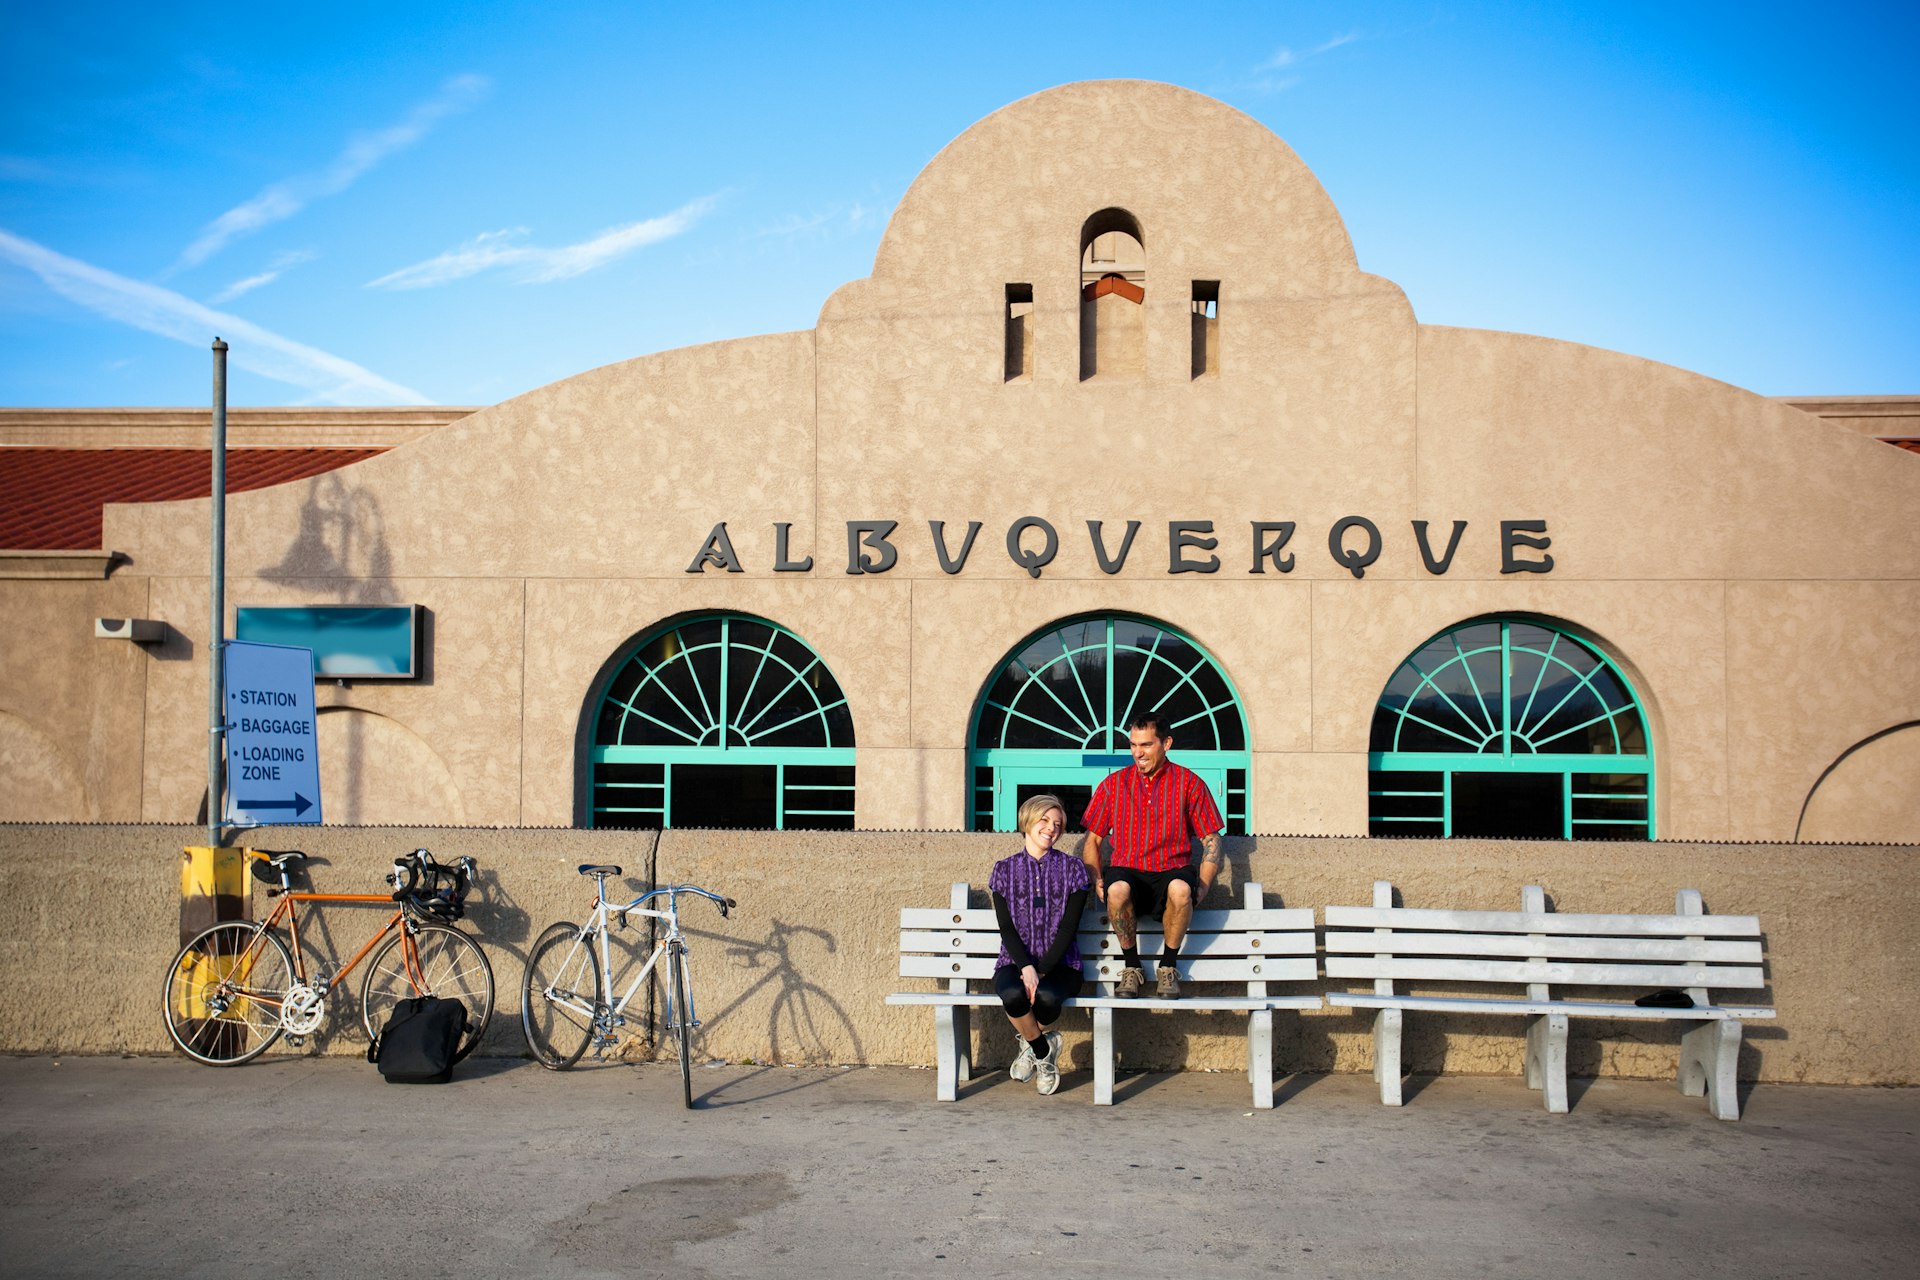 A pair of cyclists take a break in Albuquerque